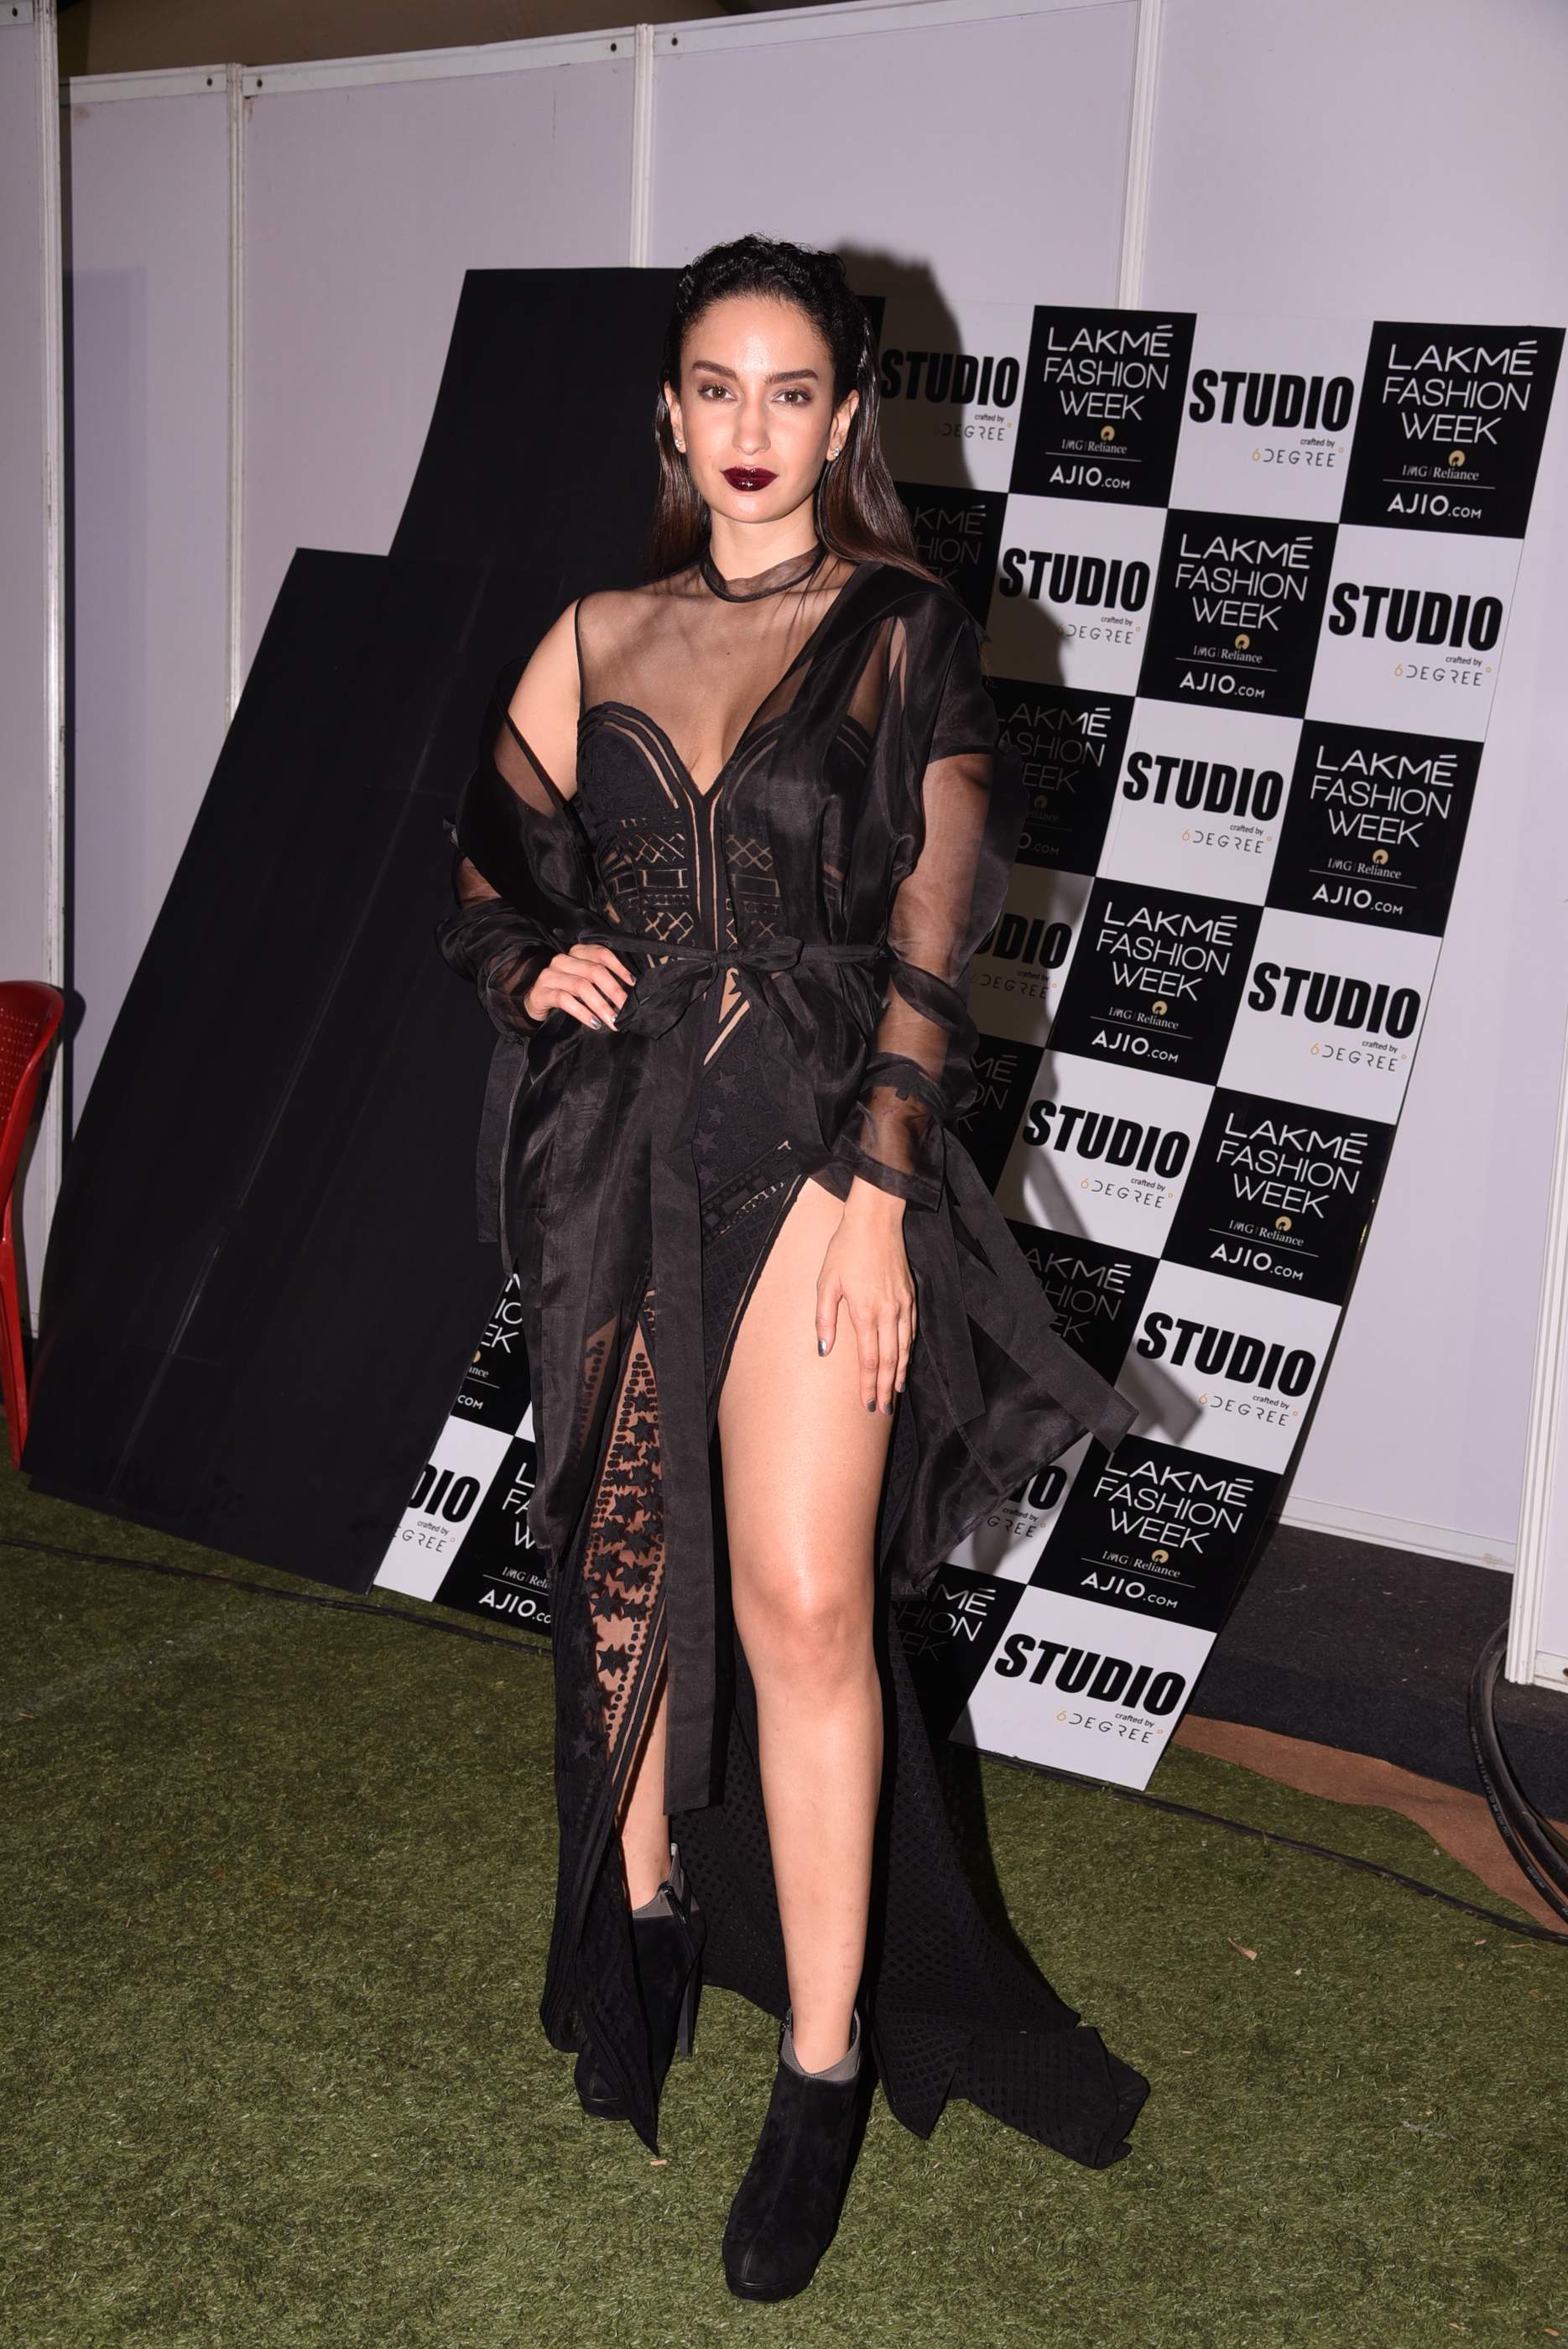 Sexiest Photo Stills Of Hot Actresses From Flash Fashion Event | Models